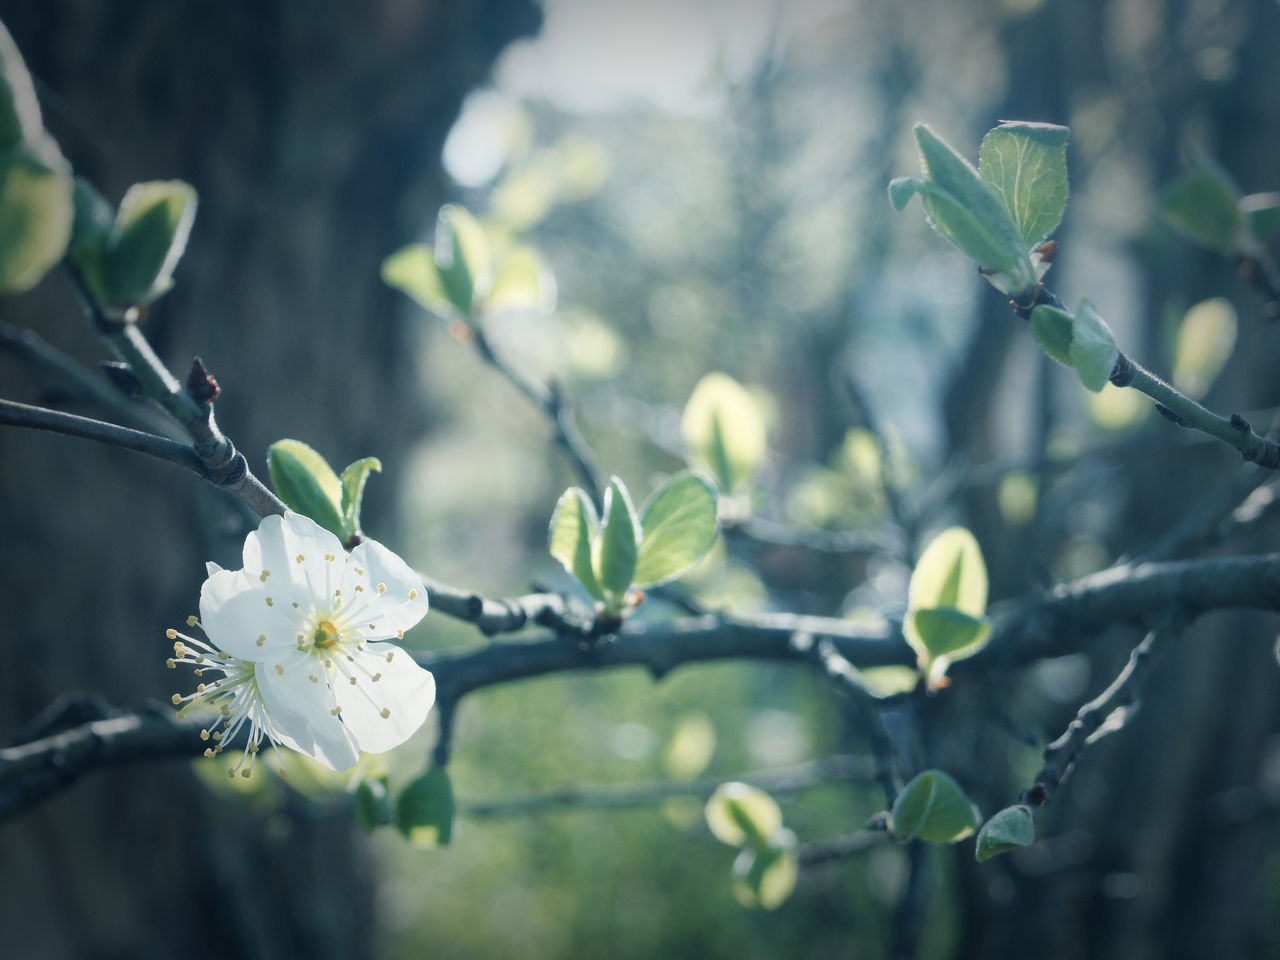 CLOSE-UP OF FRESH WHITE FLOWERING PLANT WITH TREE BRANCH